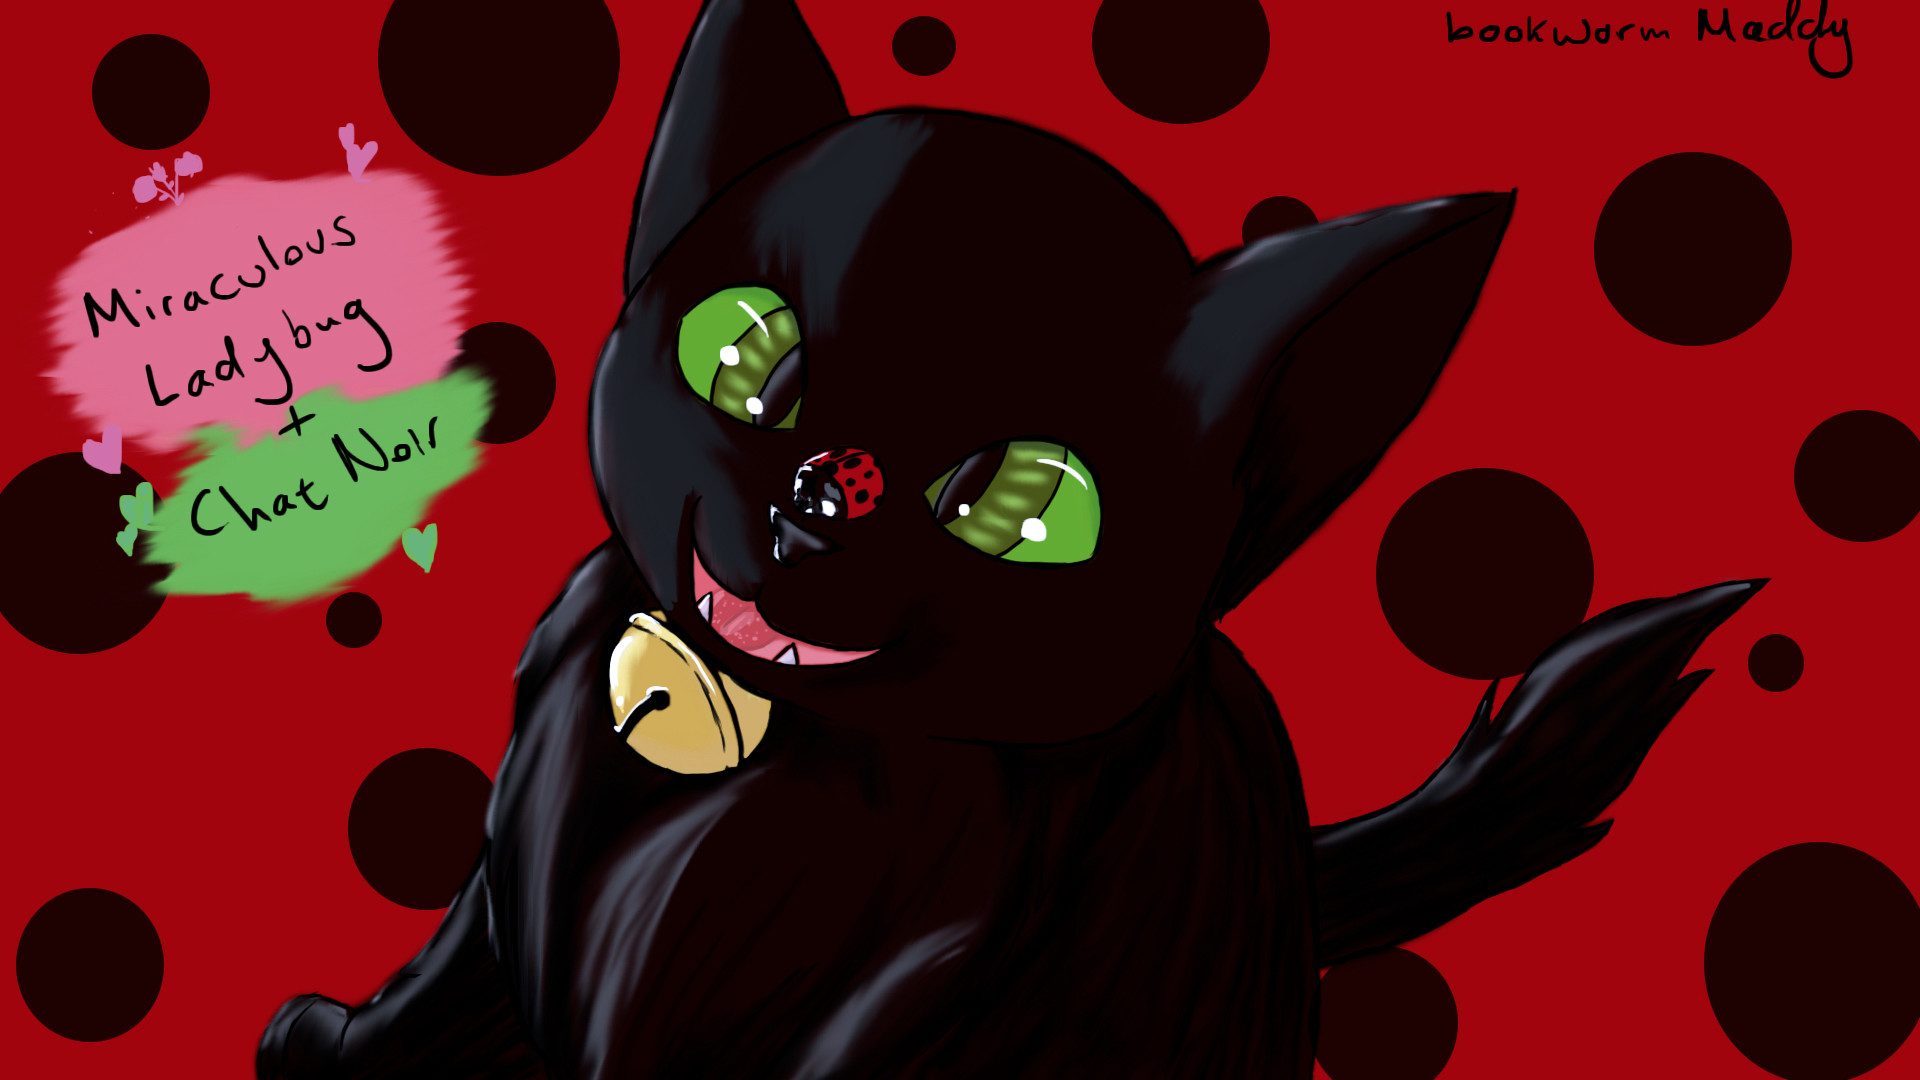 1920x1080 ... TheBookwormMaddy Miraculous Ladybug and Chat Noir by TheBookwormMaddy